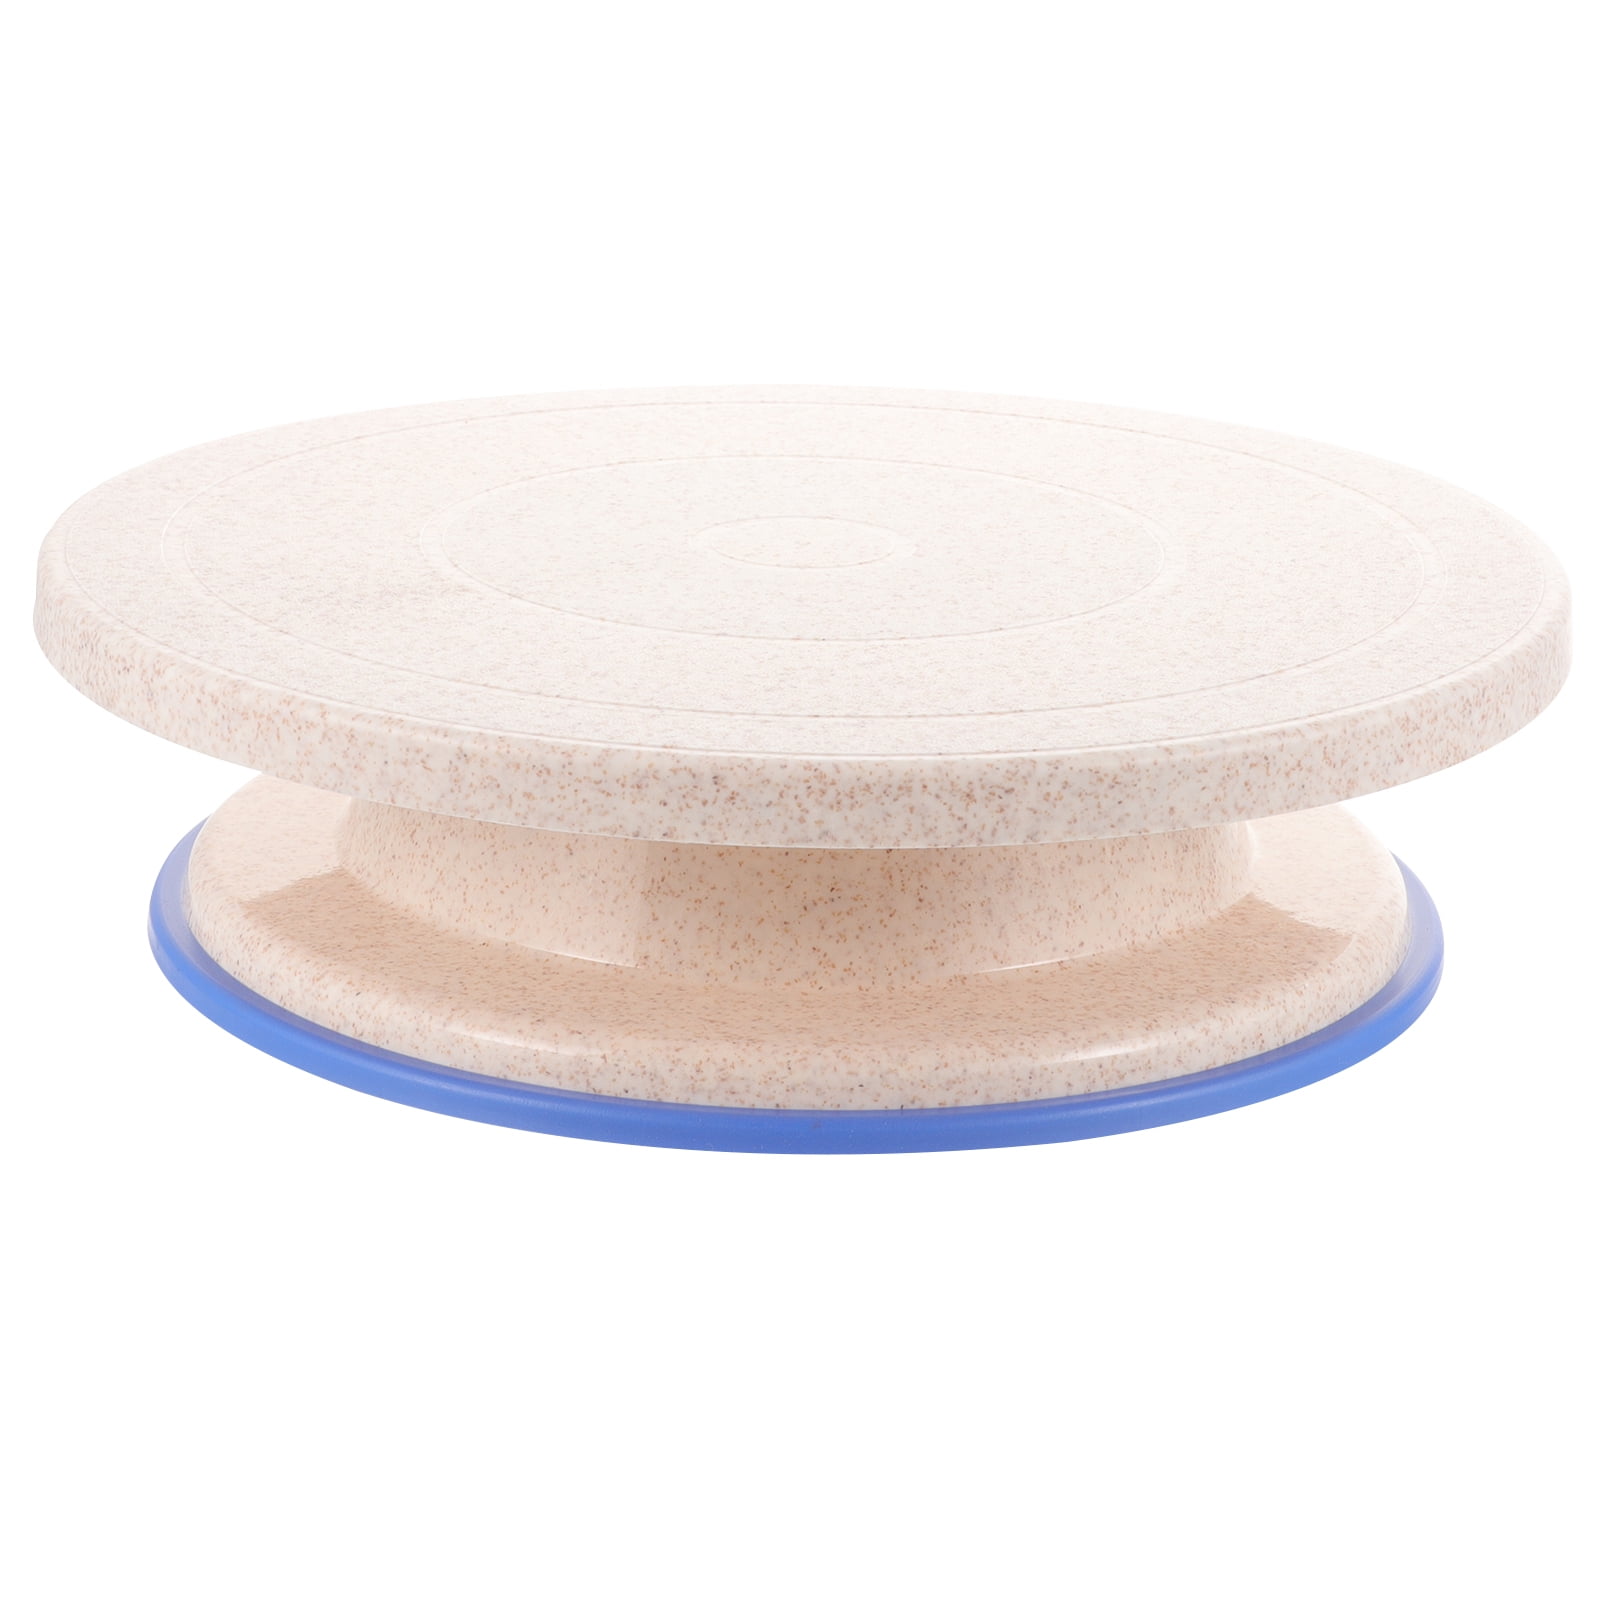 Cakes Decorating Turntable Non-Skid Cake Turntable Practical Revolving Cake Stand Cake Making Tool, Size: 27x27cm